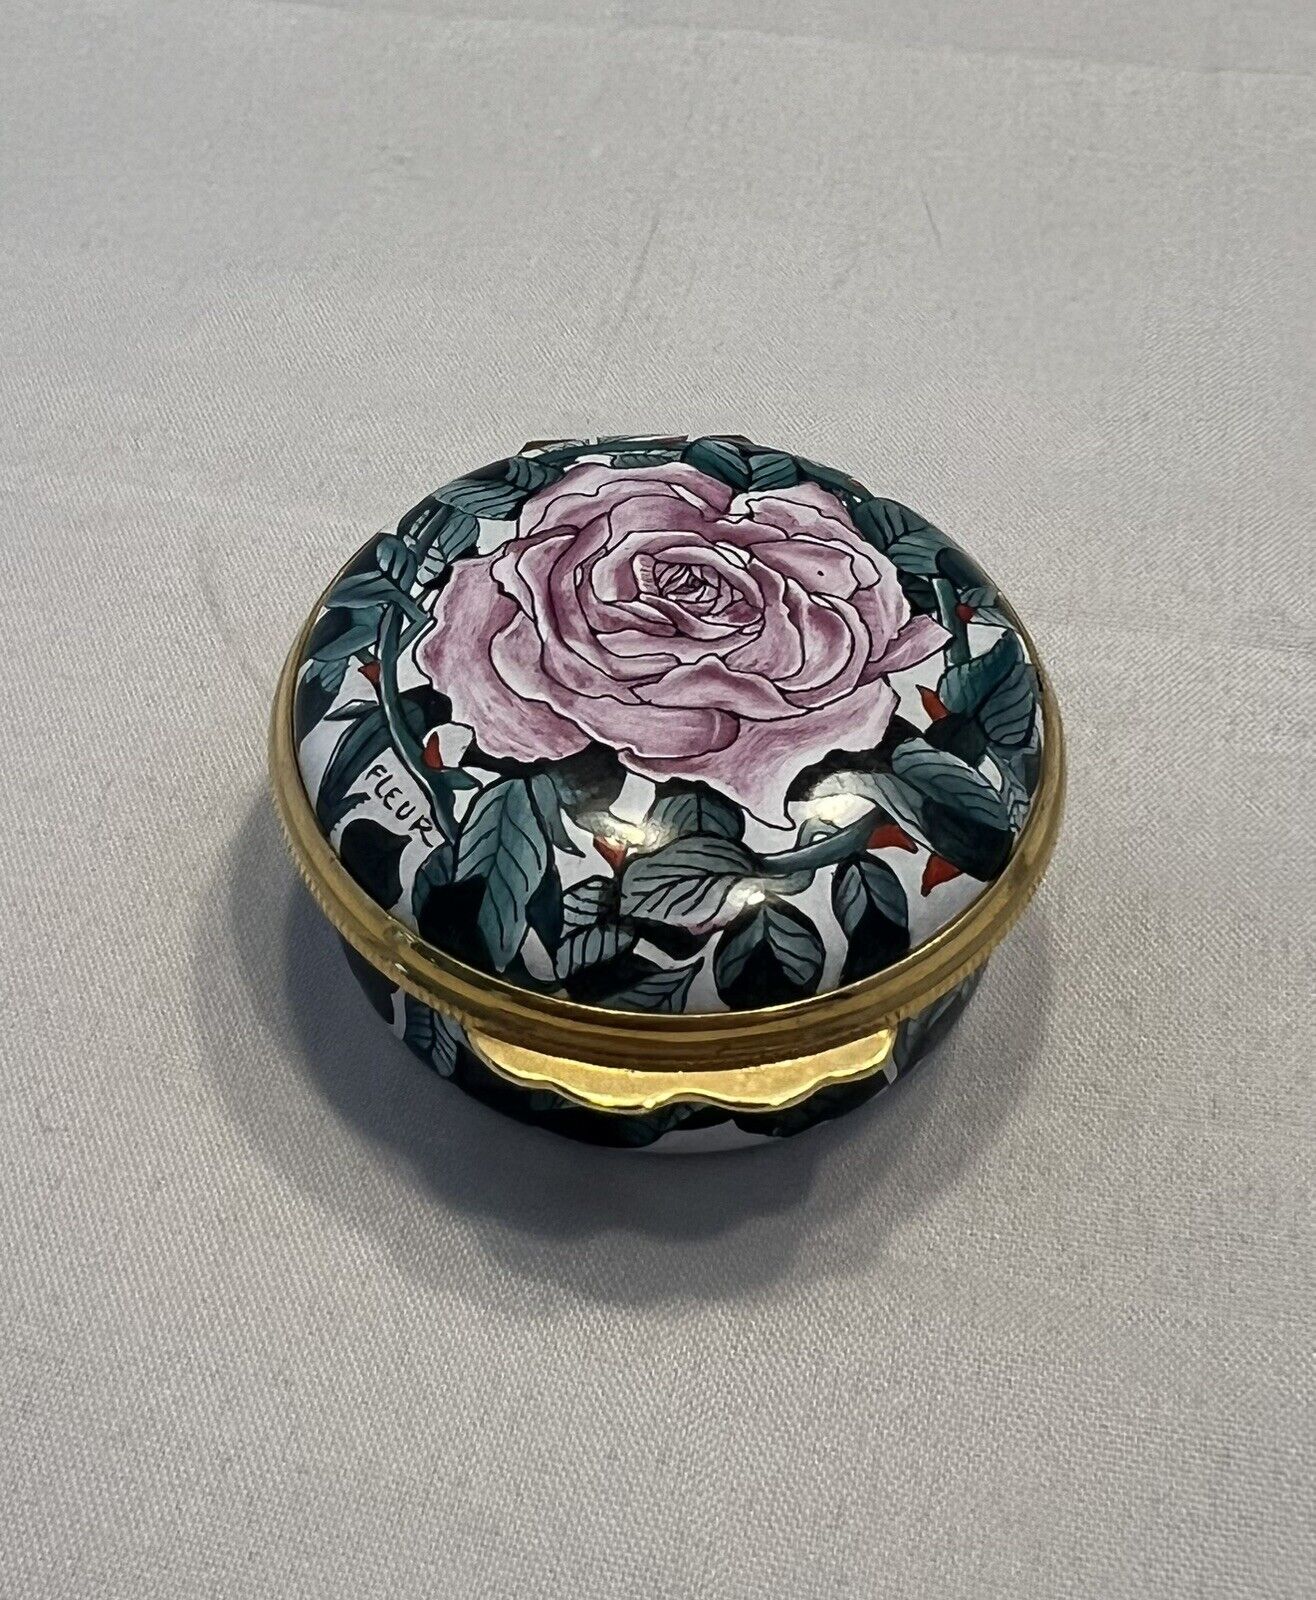 HALCYON DAYS Round Enamel Porcelain Hinged Trinket Box THE ROSE by FLEUR COWLES